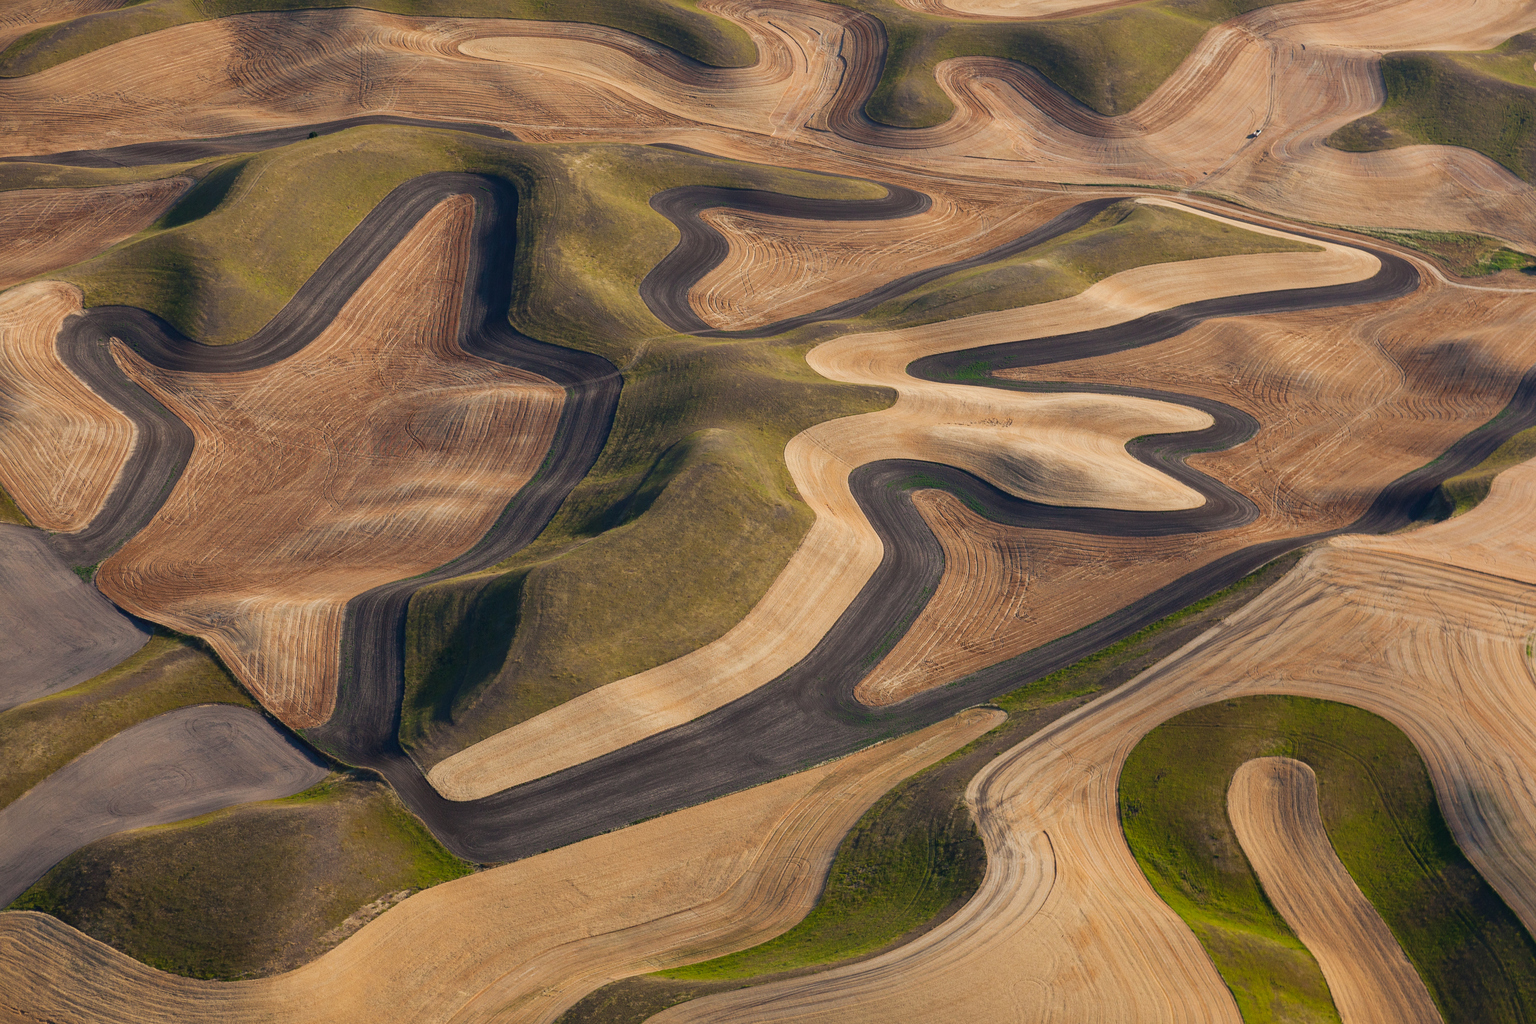 Farmland landscape, with ploughed fields and furrows in Palouse, Washington, USA. An aerial view with natural patterns,